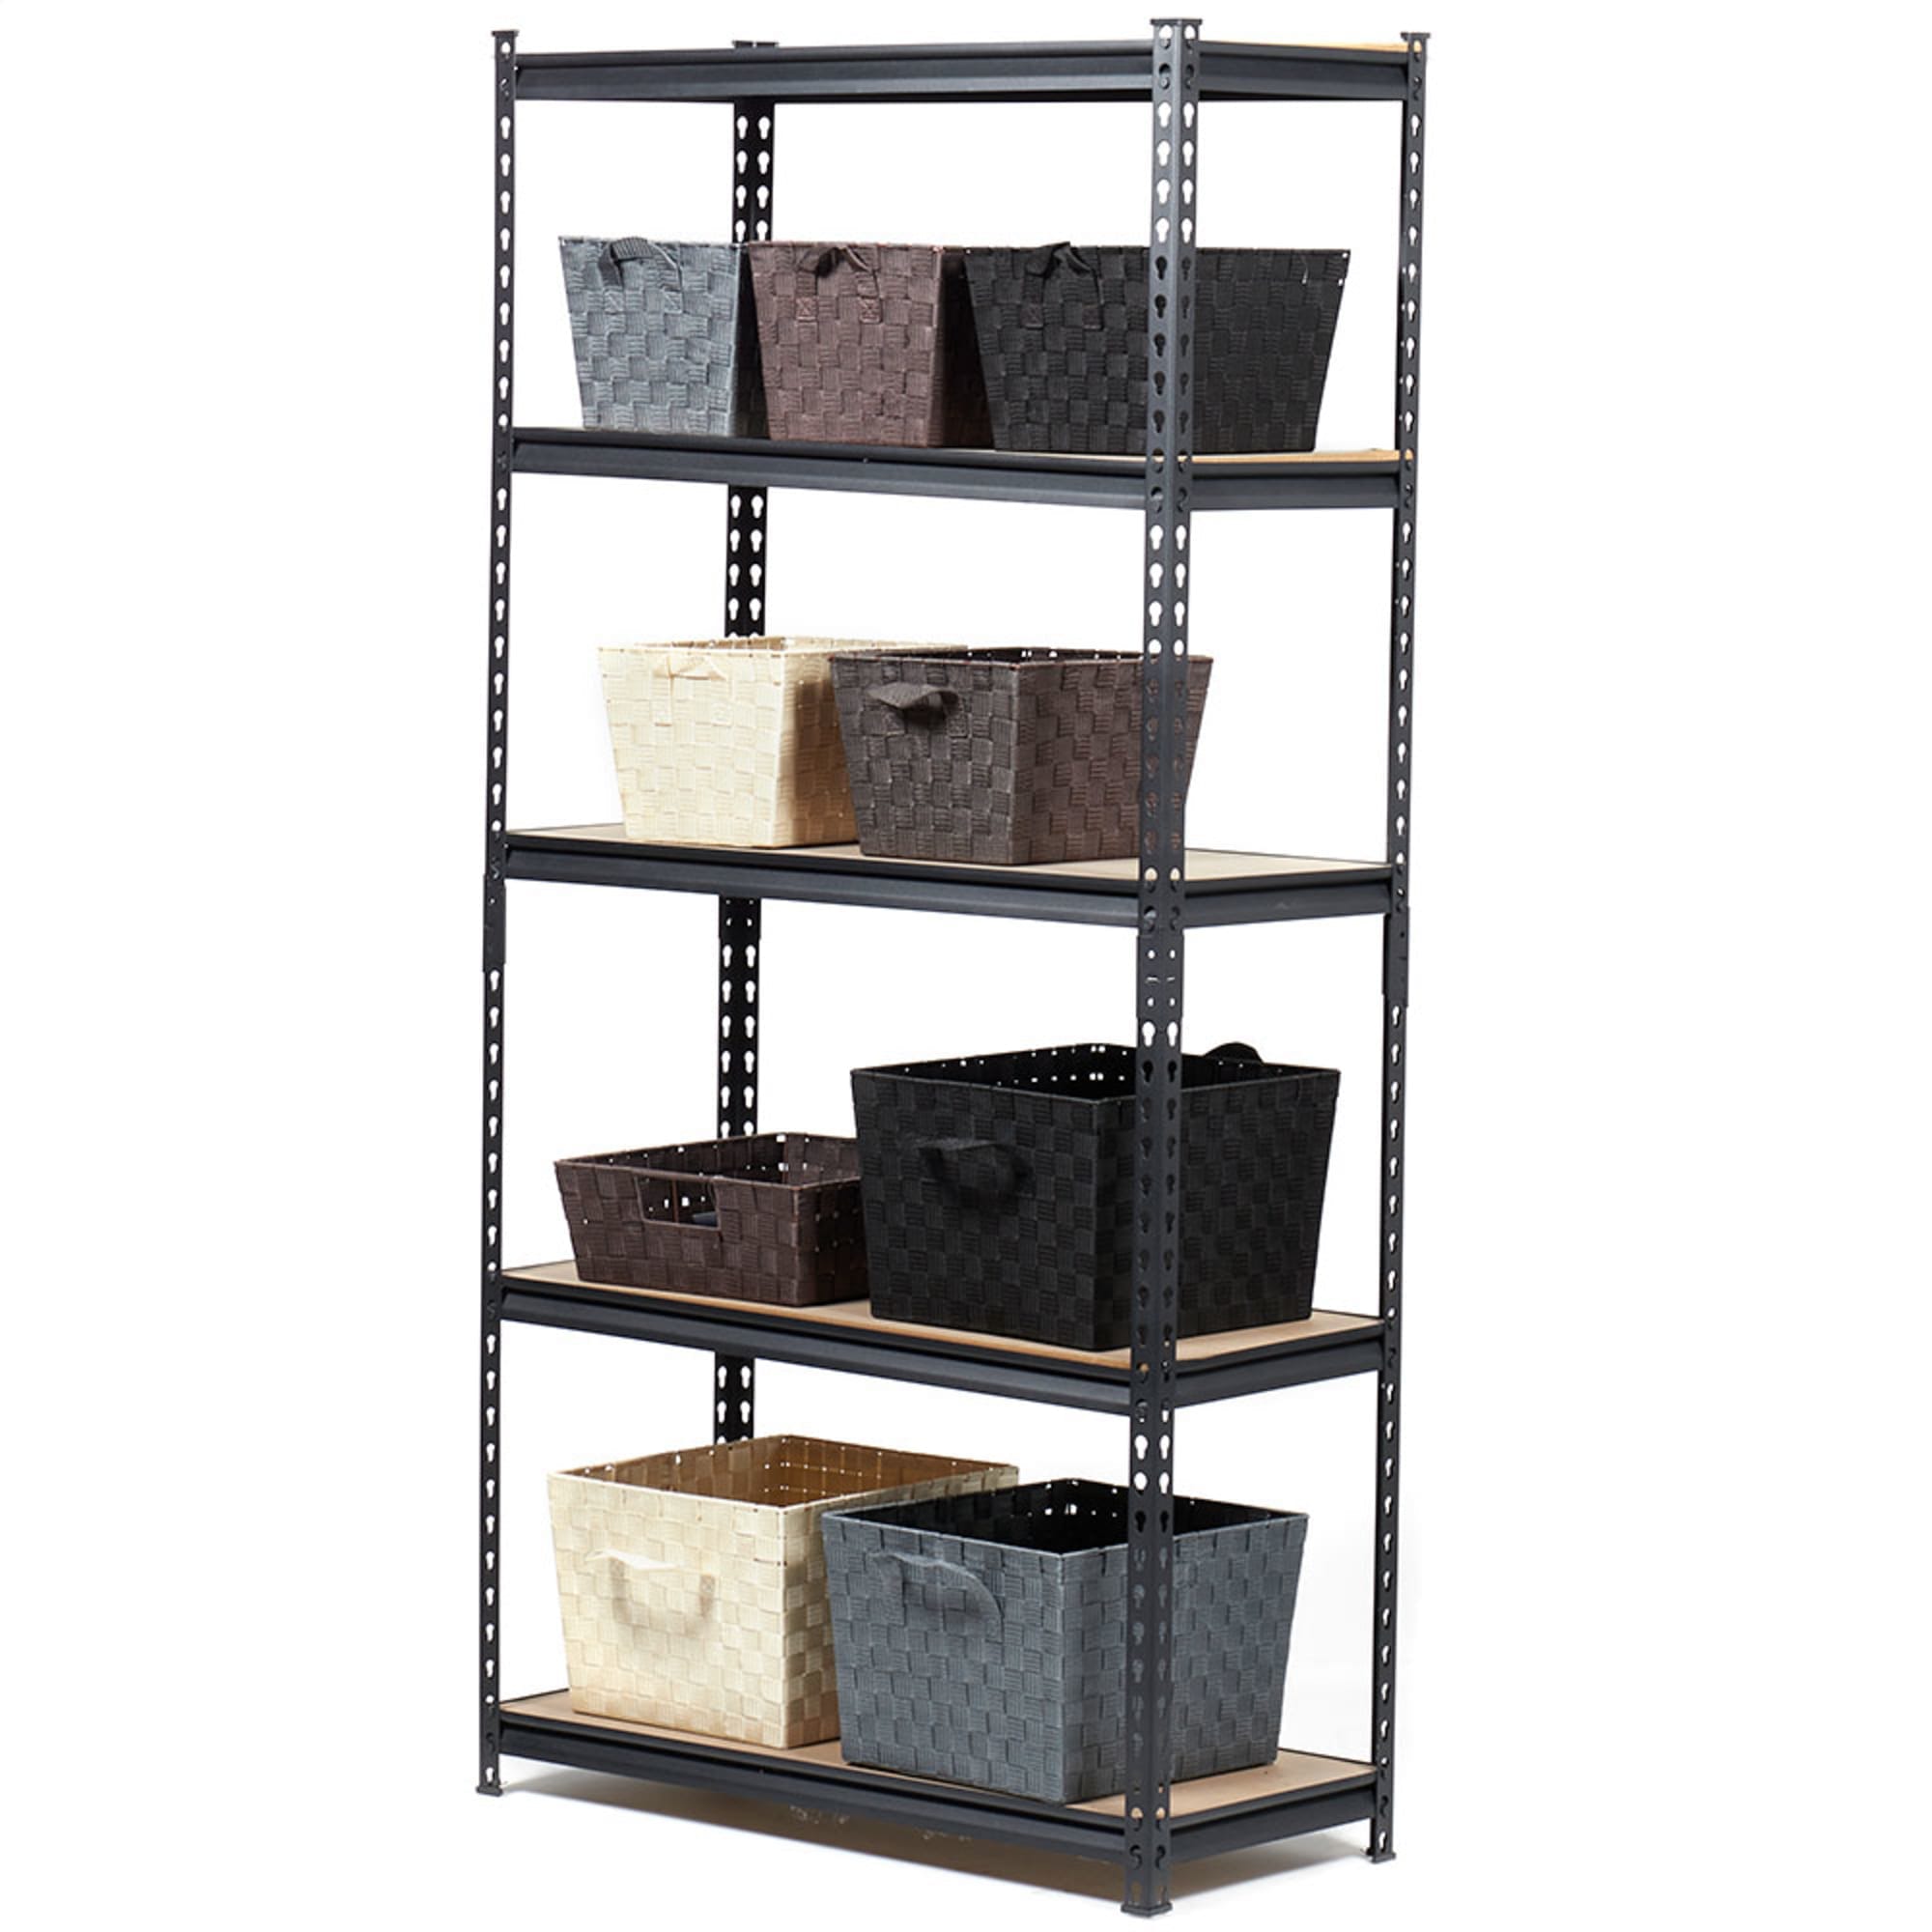 Home Basics Quick Assembly 5 Tier Heavy Duty Shelf,  (35" x 72"), Black $80.00 EACH, CASE PACK OF 1